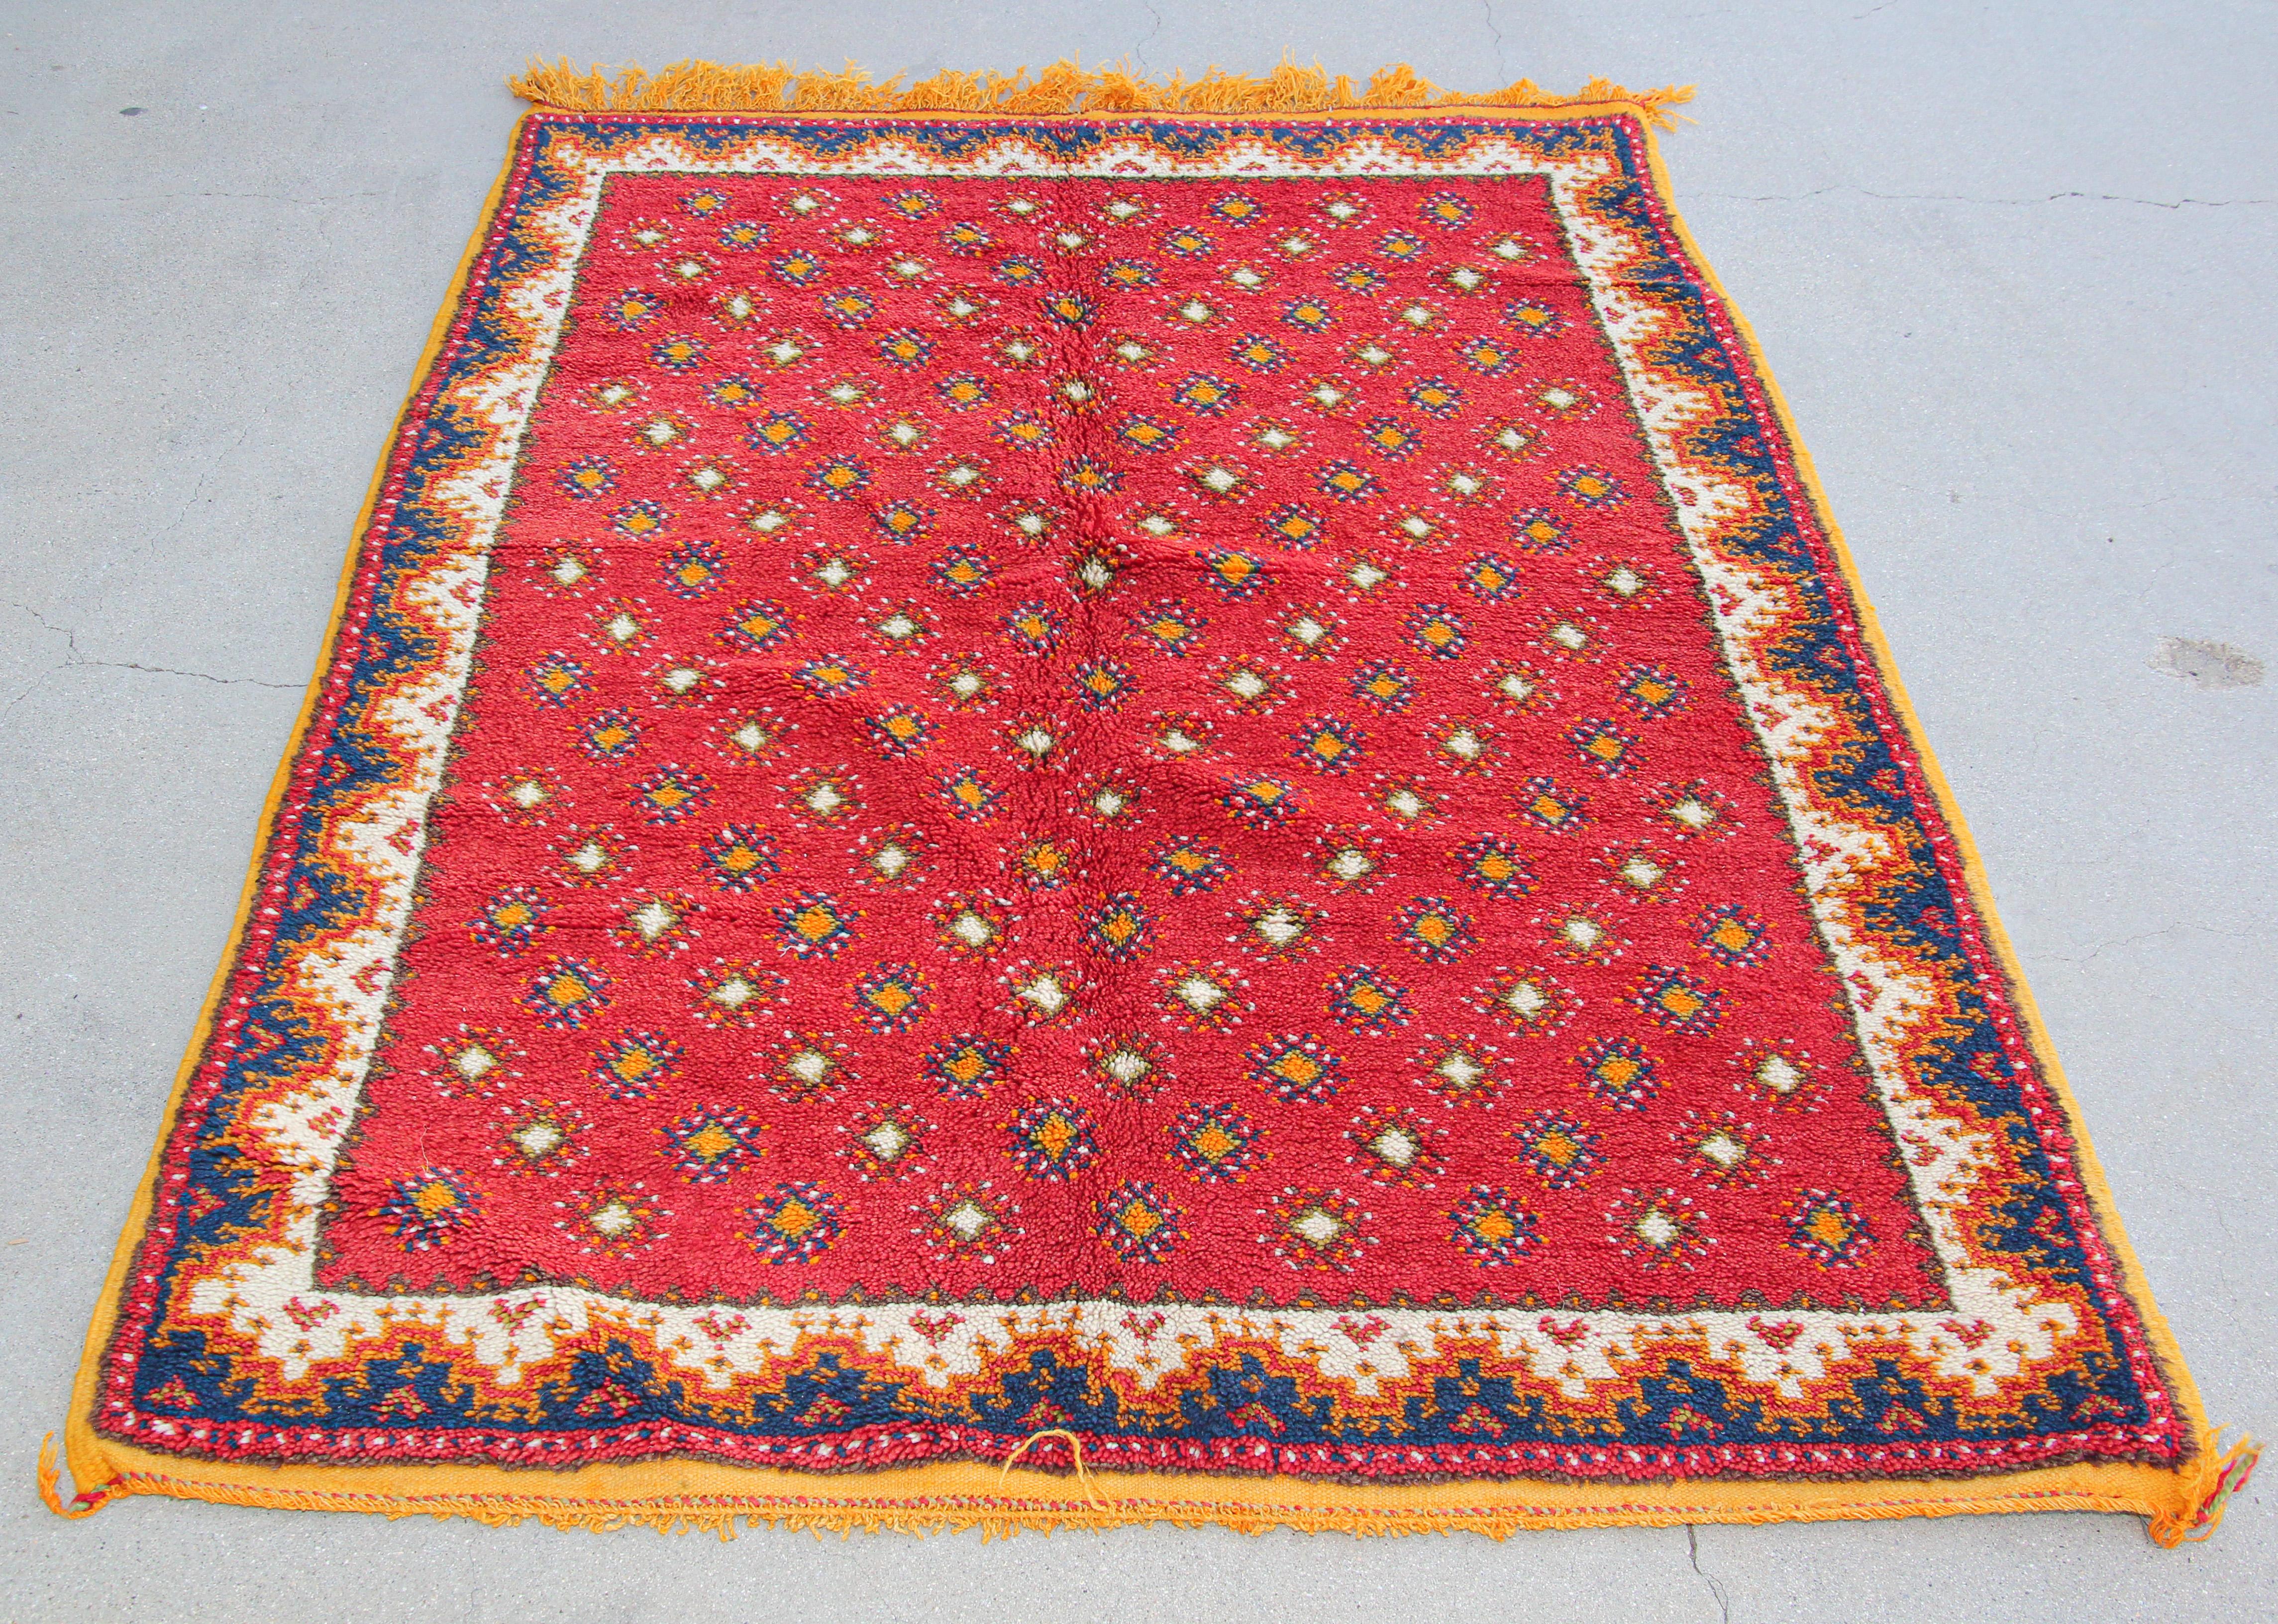 1960s authentic Moroccan vintage tribal rug handwoven by Berber Moroccan women using organic lamb wo and organic dye.North African Moroccan tribal runner with low pile handwoven wo, hand-knotted by the Berber tribes of Morocco with traditional